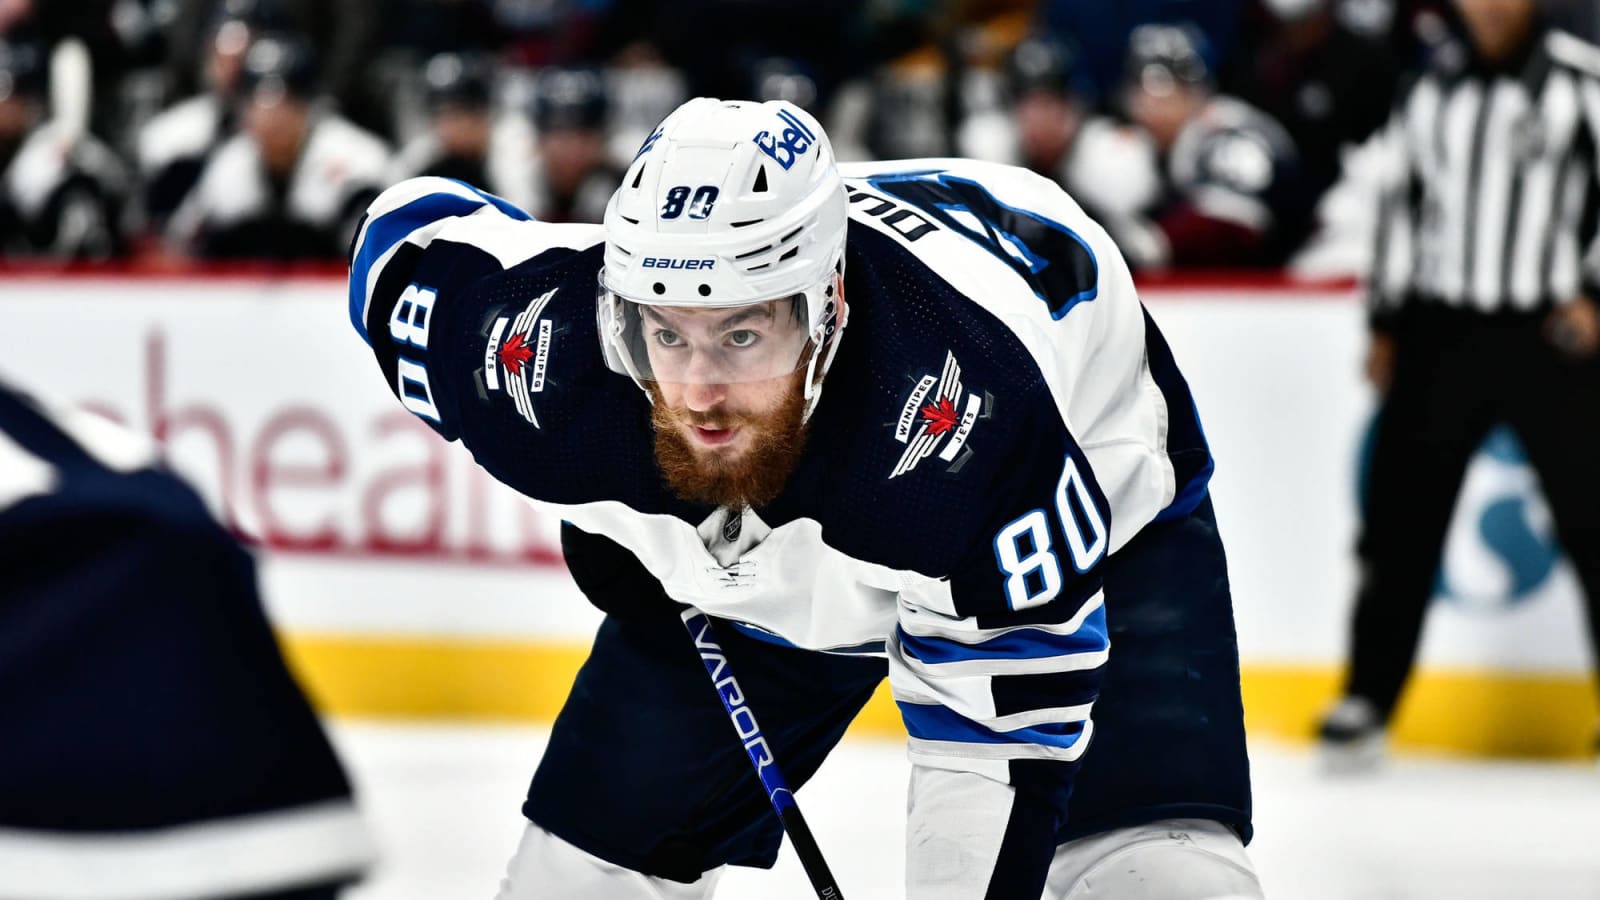 Appleton, Dubois, Svechnikov: Three skaters to watch as Jets conclude back-to-back versus Maple Leafs (6:00 pm CT, TSN 3)